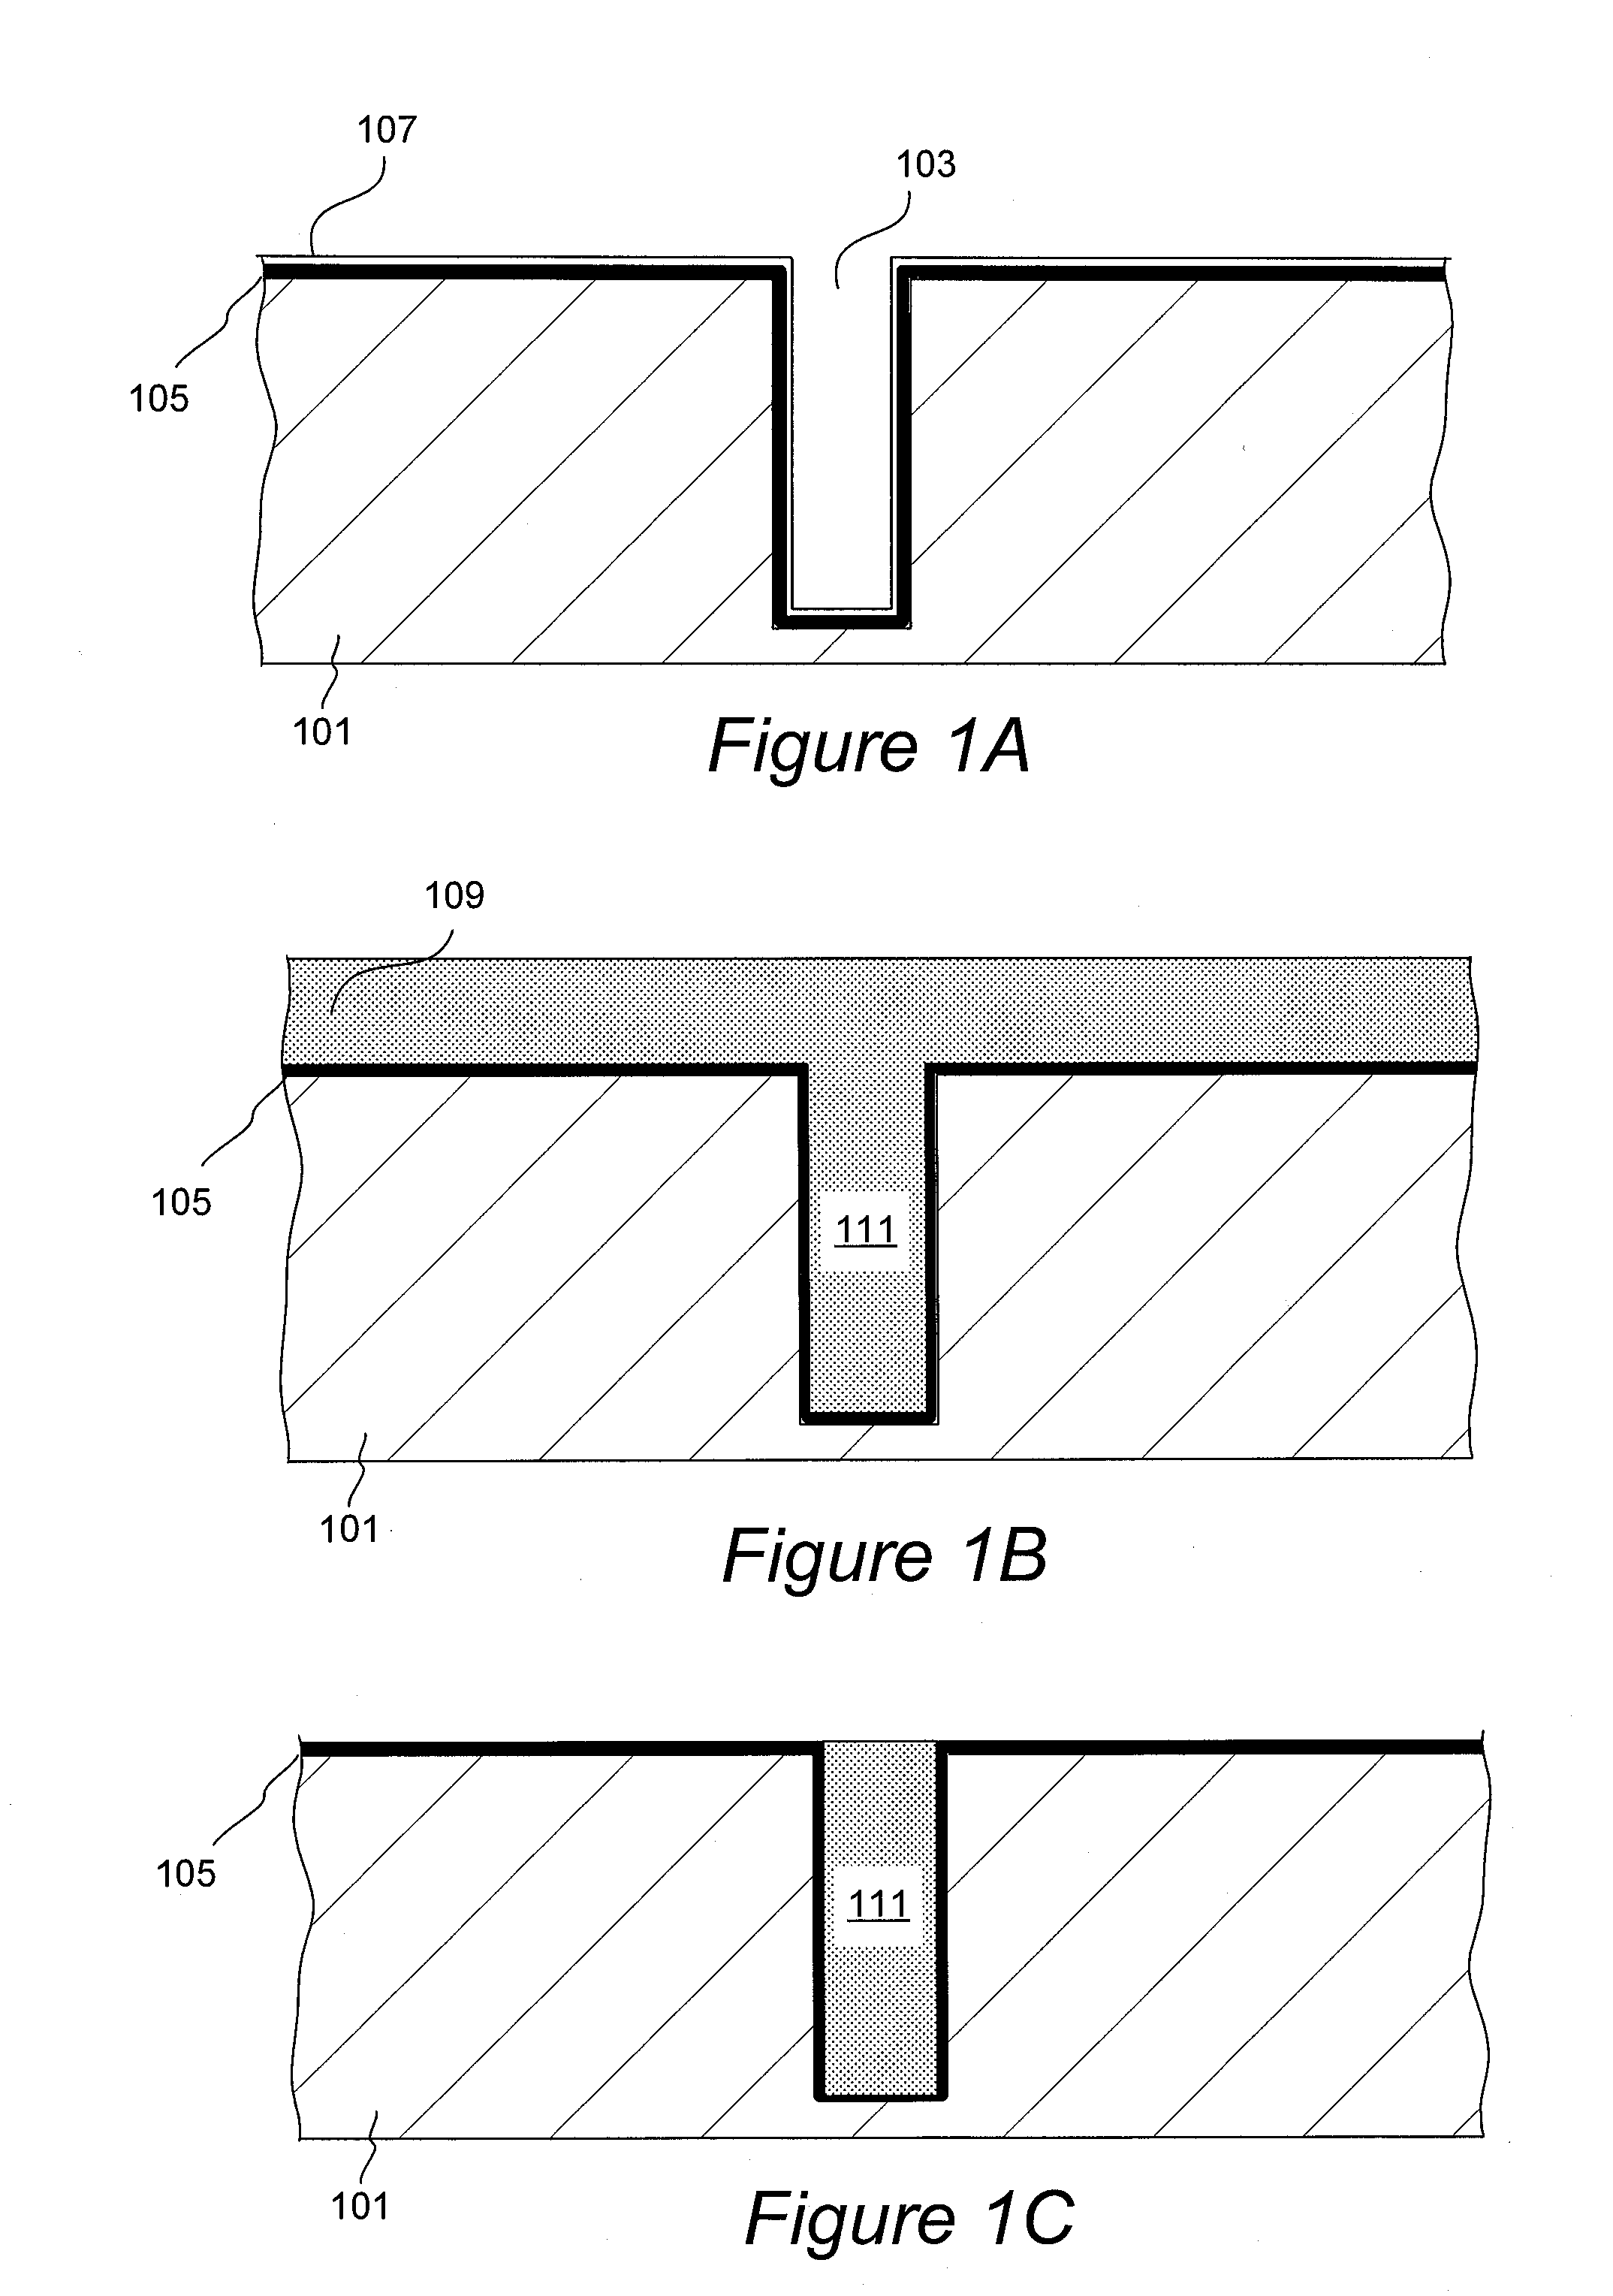 Electrolyte Concentration Control System for High Rate Electroplating